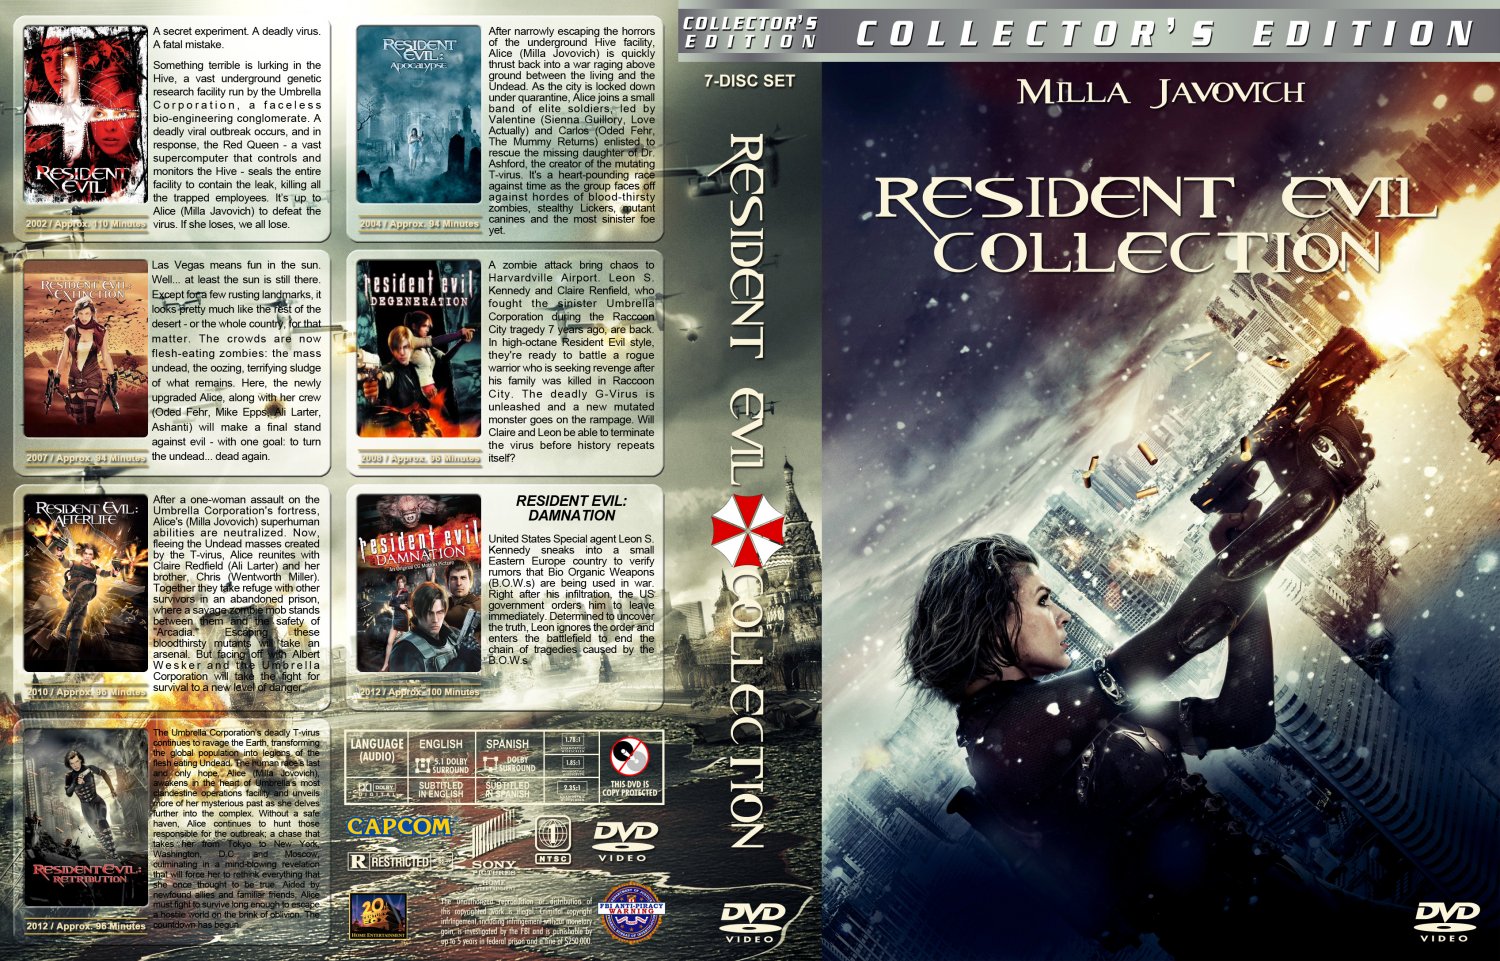 Resident Evil Collection- Movie DVD Custom Covers - Resident Evil Colle...